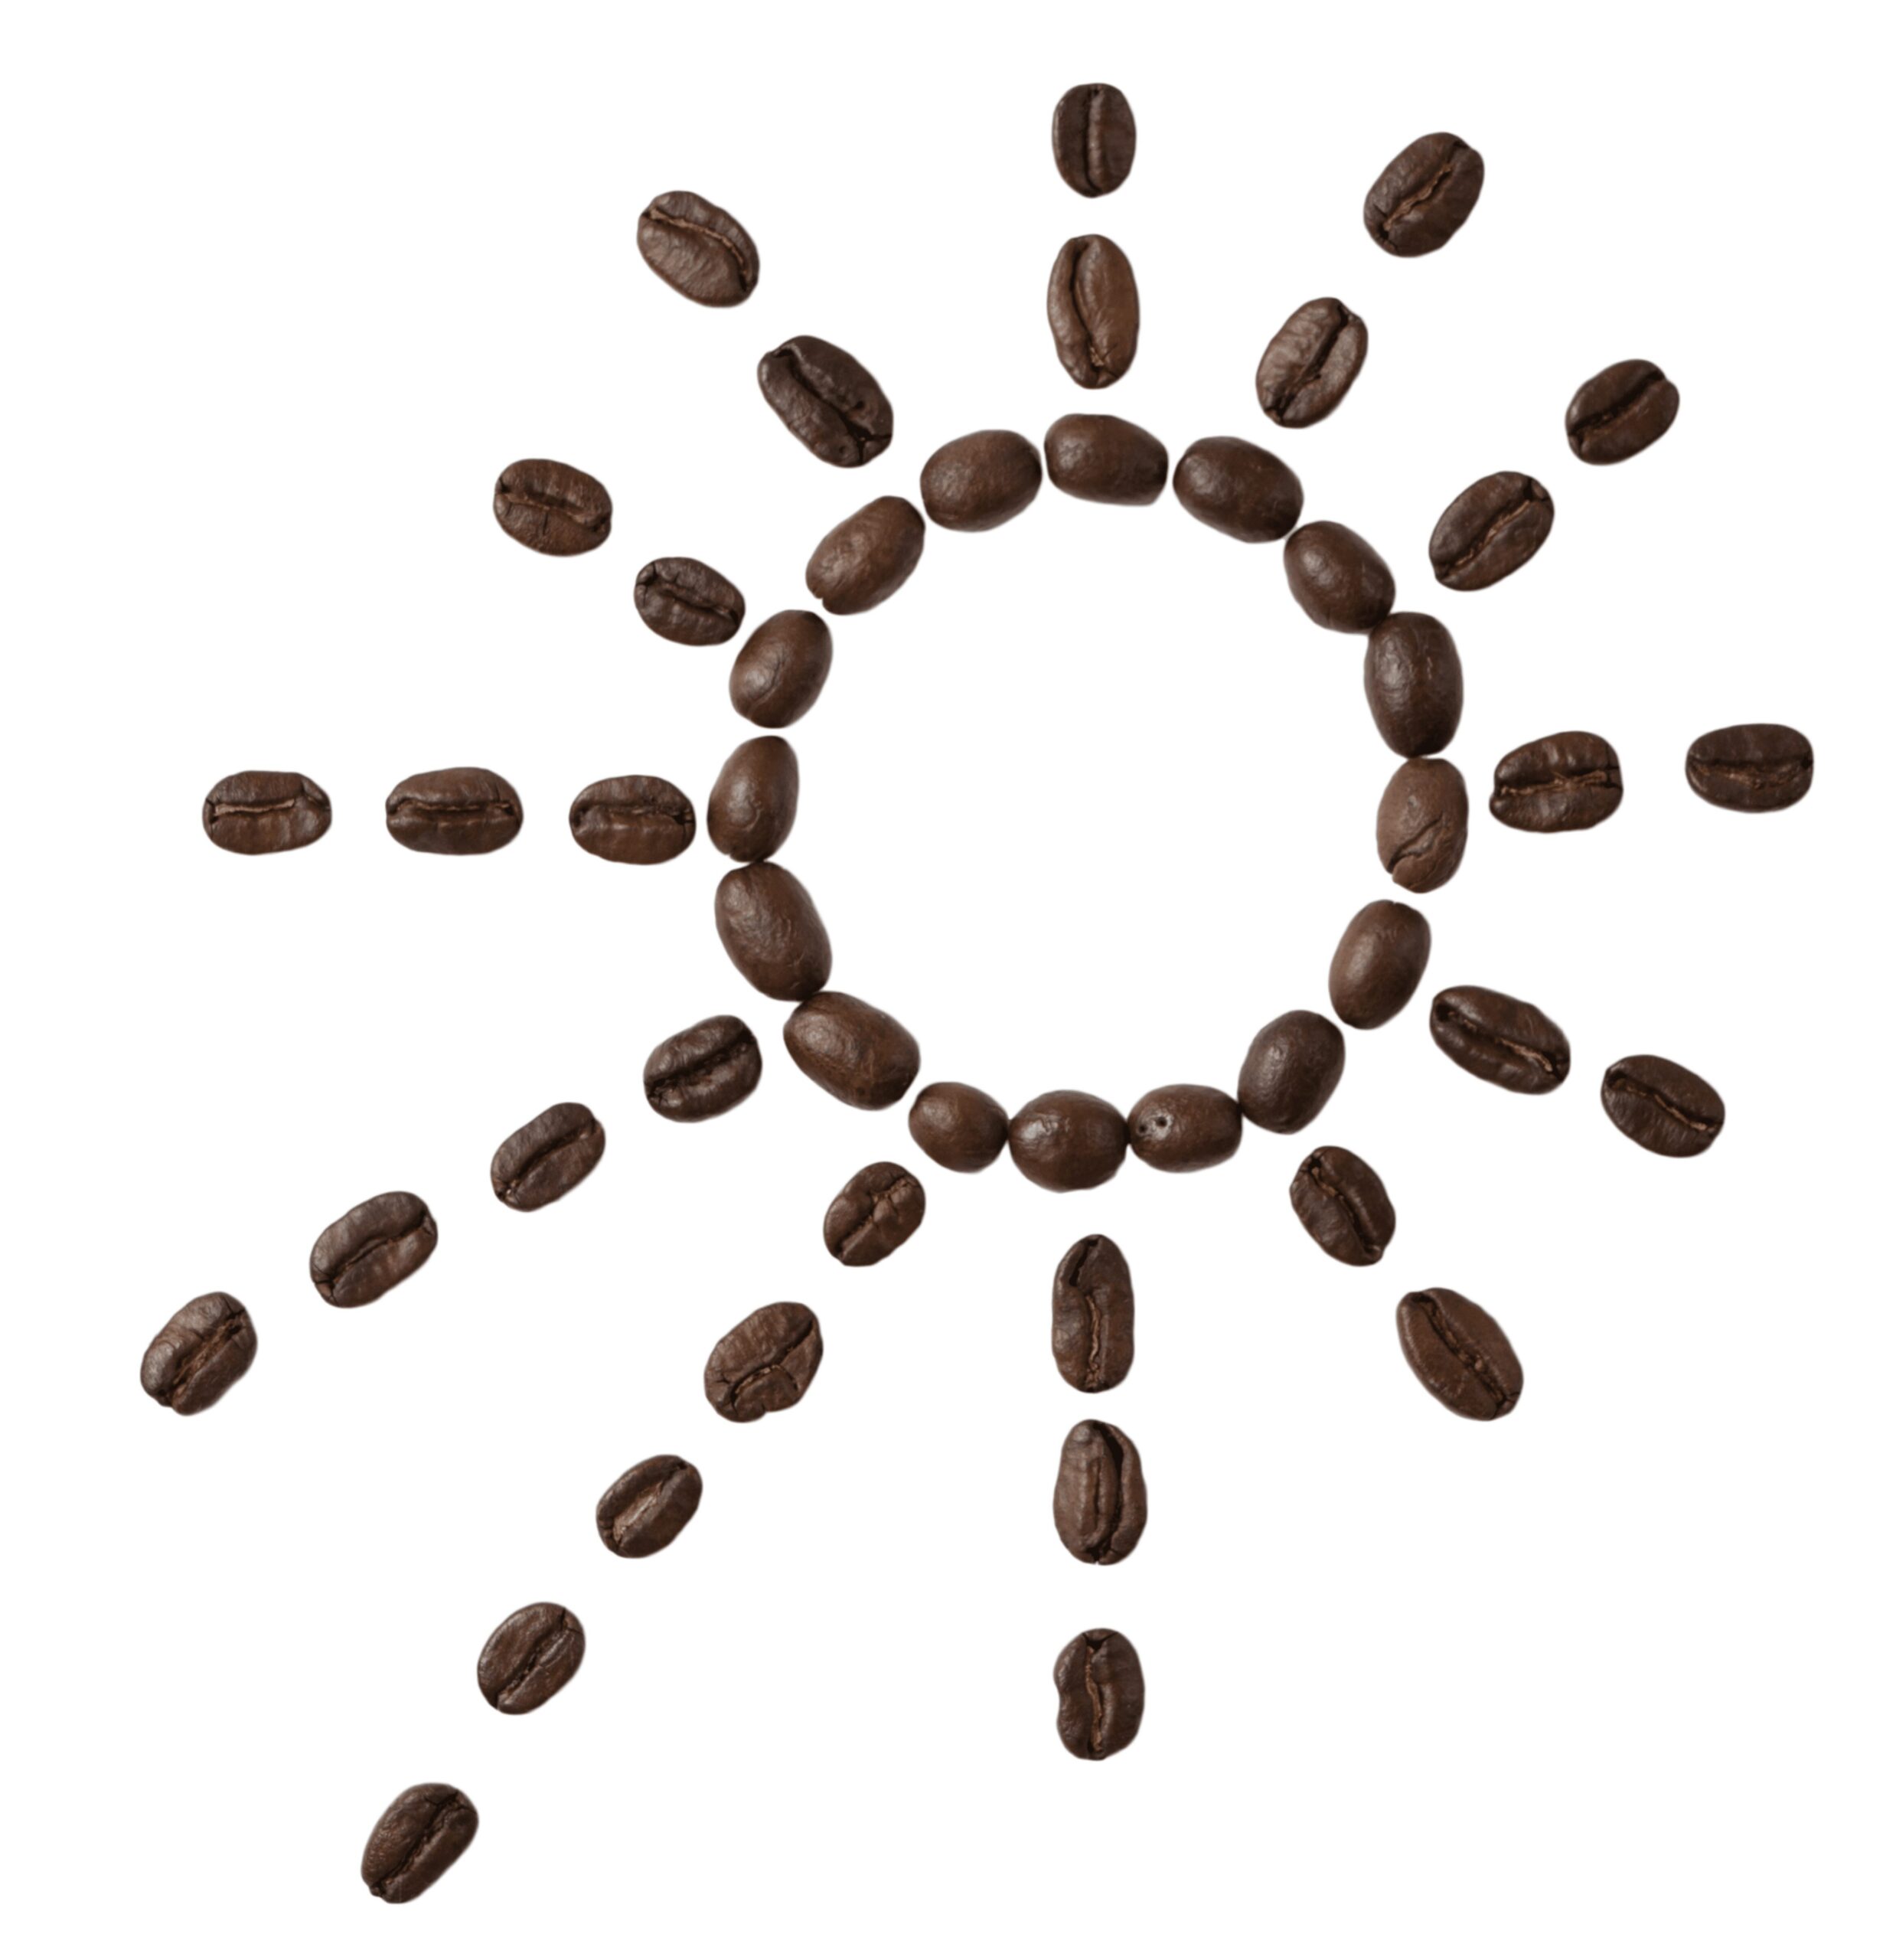 Coffee beans arranged in the shape of a sun with a circular center and lines of beans radiating outwards as the sun's rays, all set against a plain white background, symbolize an eco-friendly approach to morning rituals.